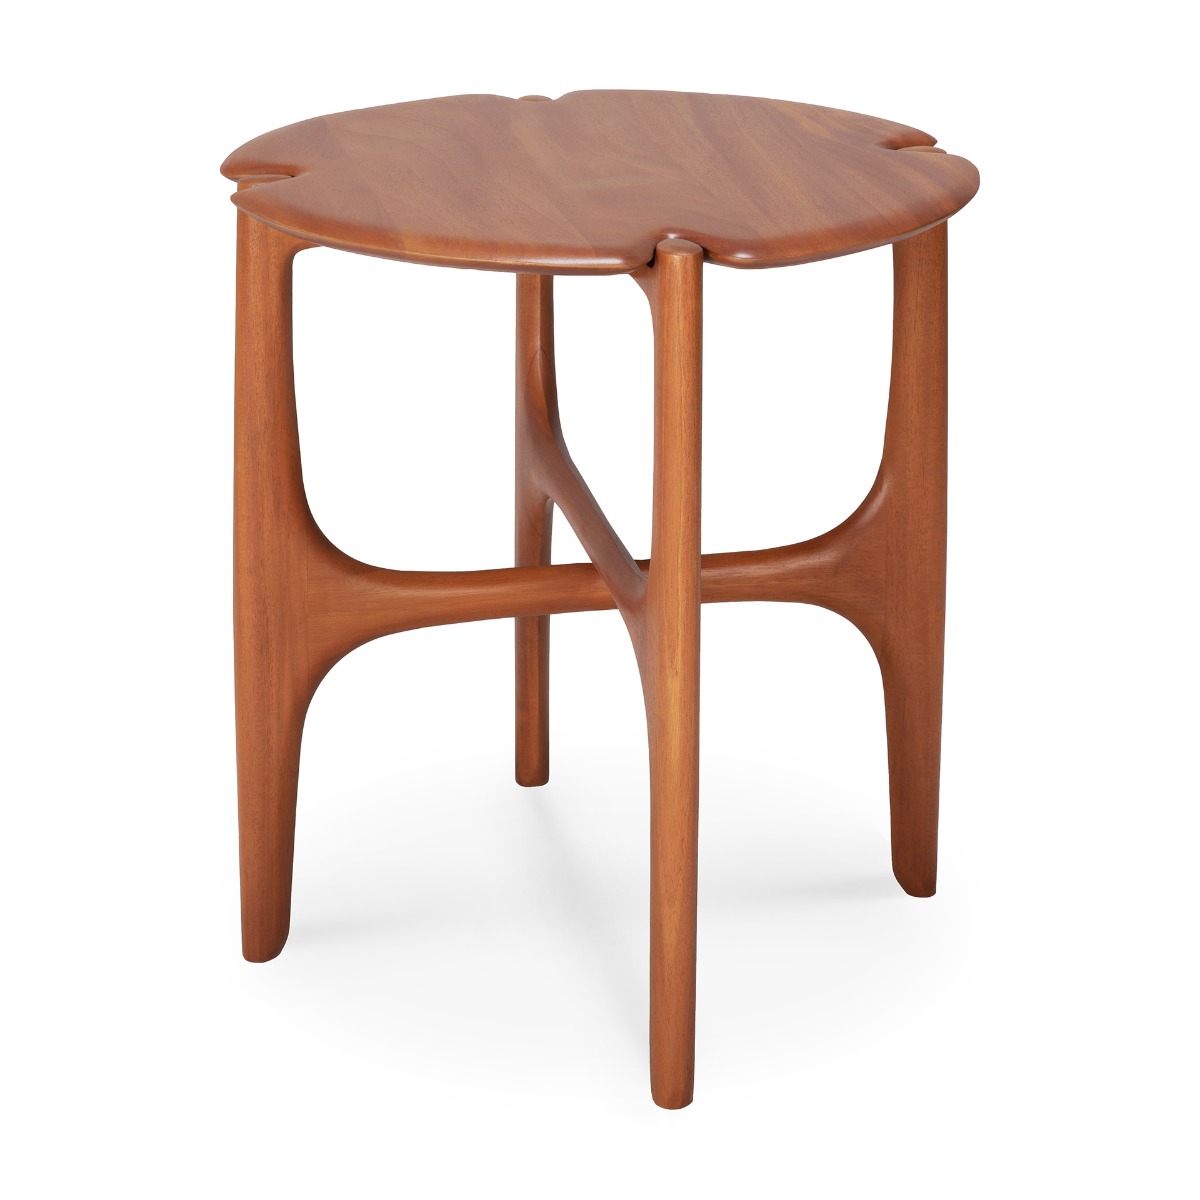 Discontinued PI side table in Mahogany 